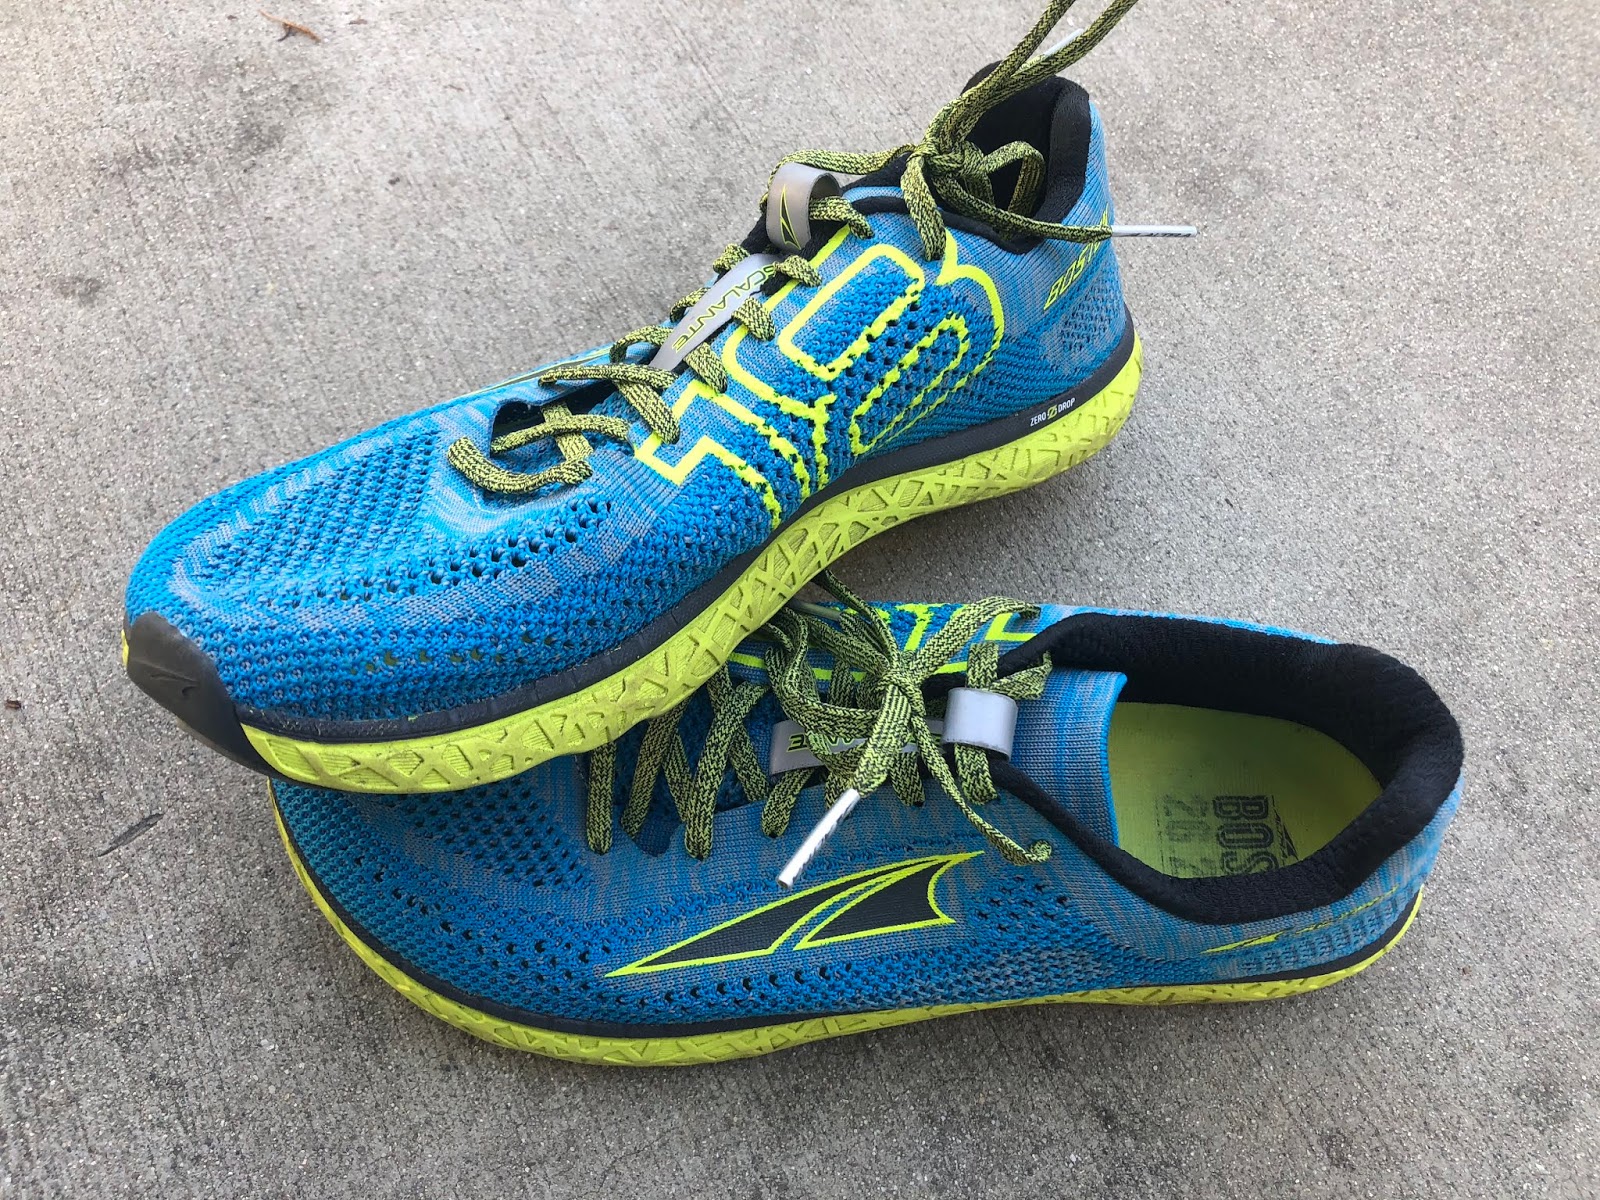 Altra Escalante Racer Review - DOCTORS OF RUNNING